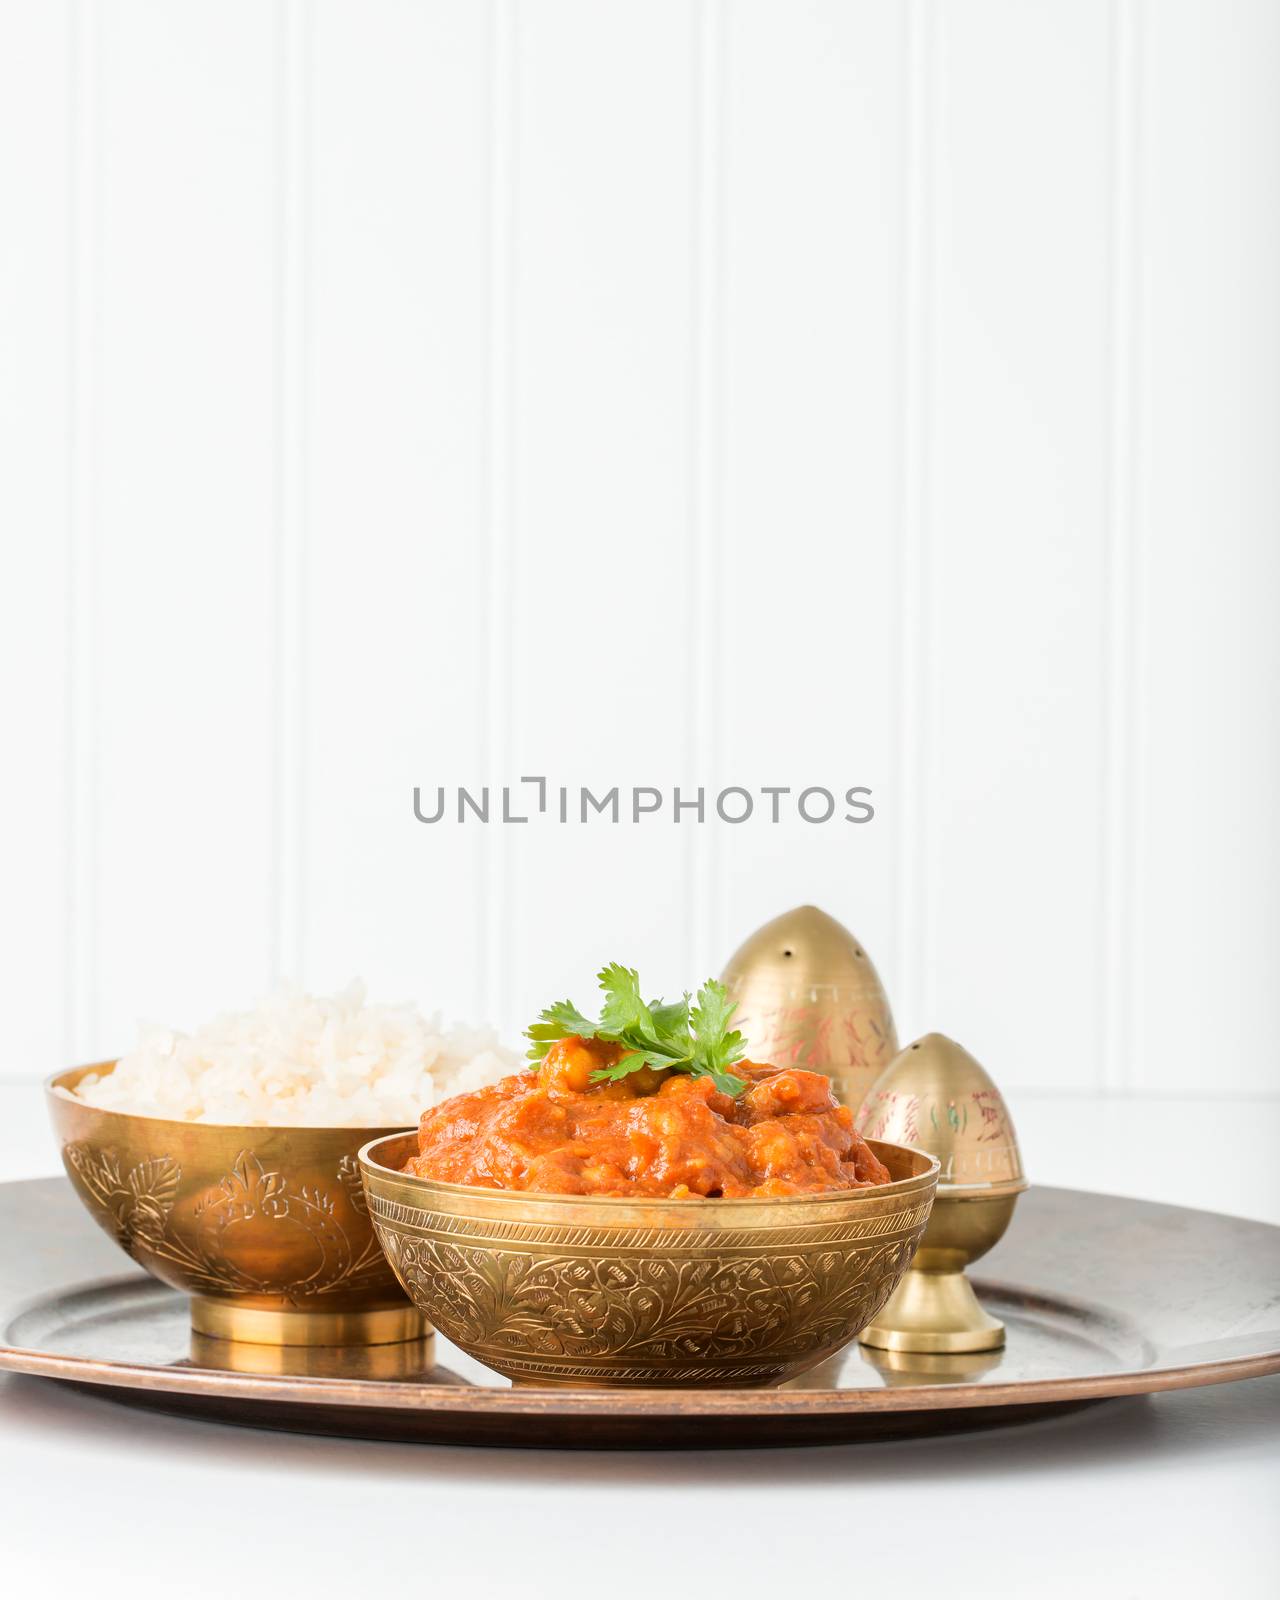 Chana Masala, a vegetarian chick pea dish served with white rice.